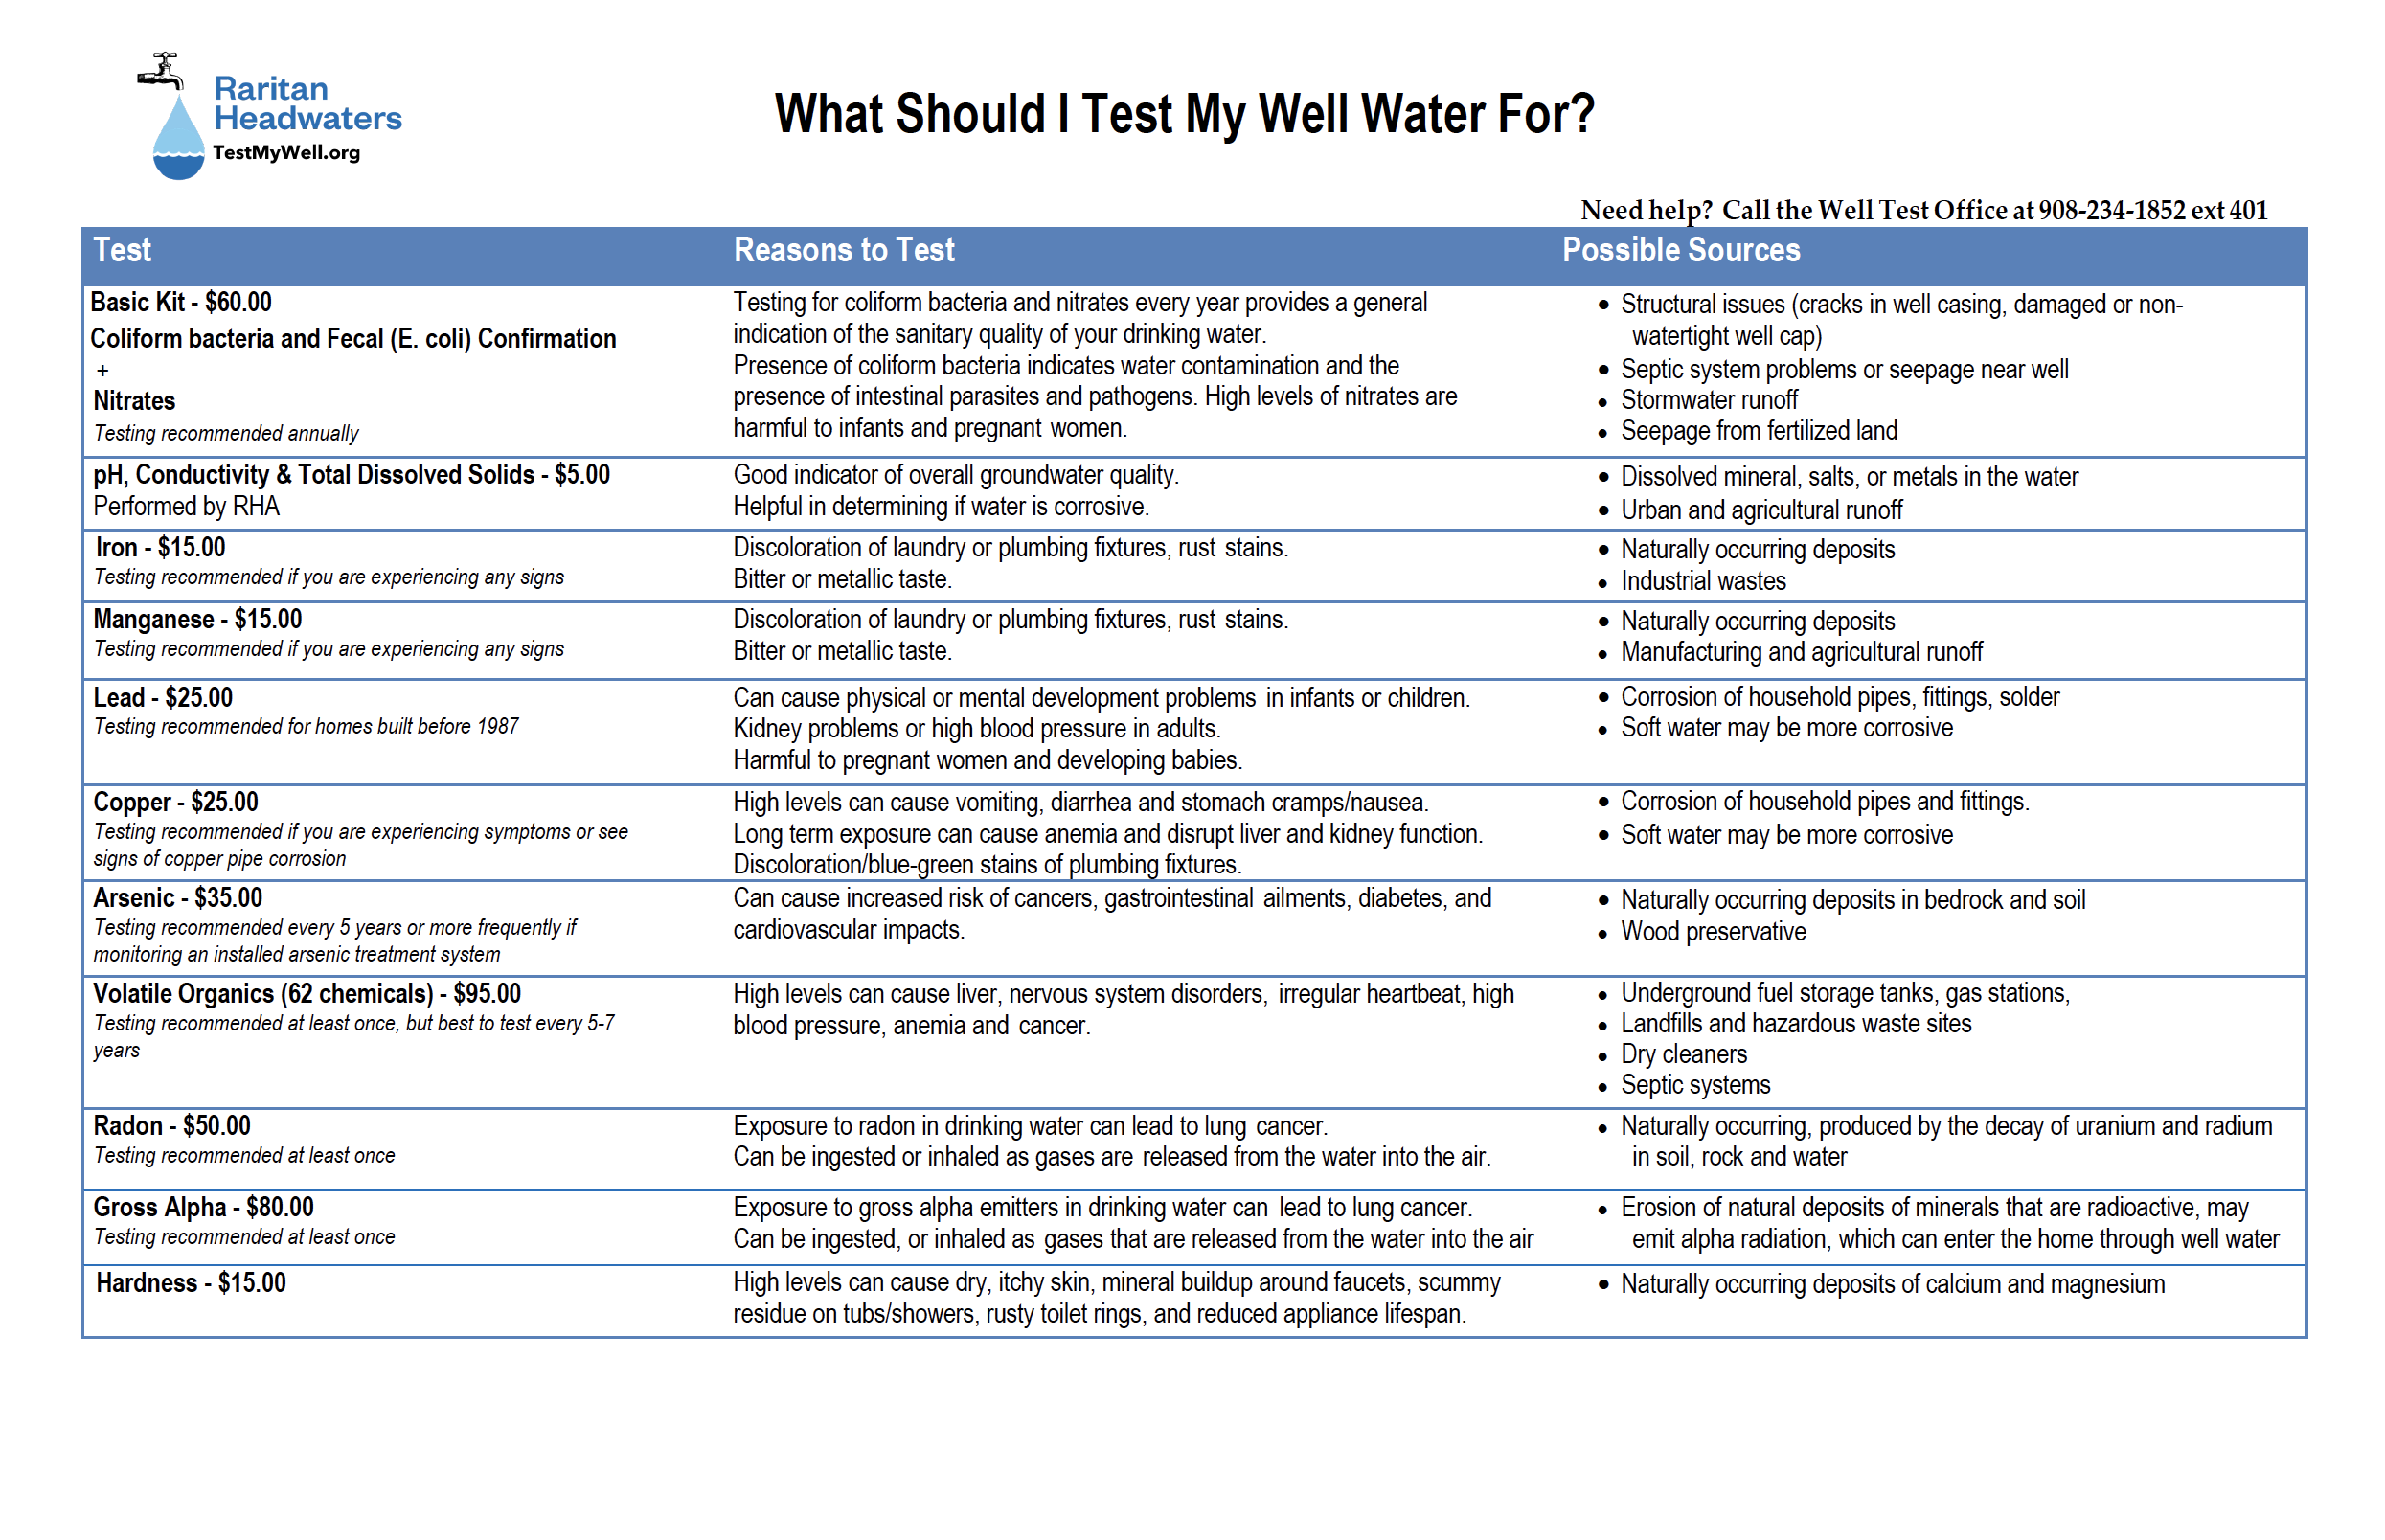 What should I test my water for informational sheet